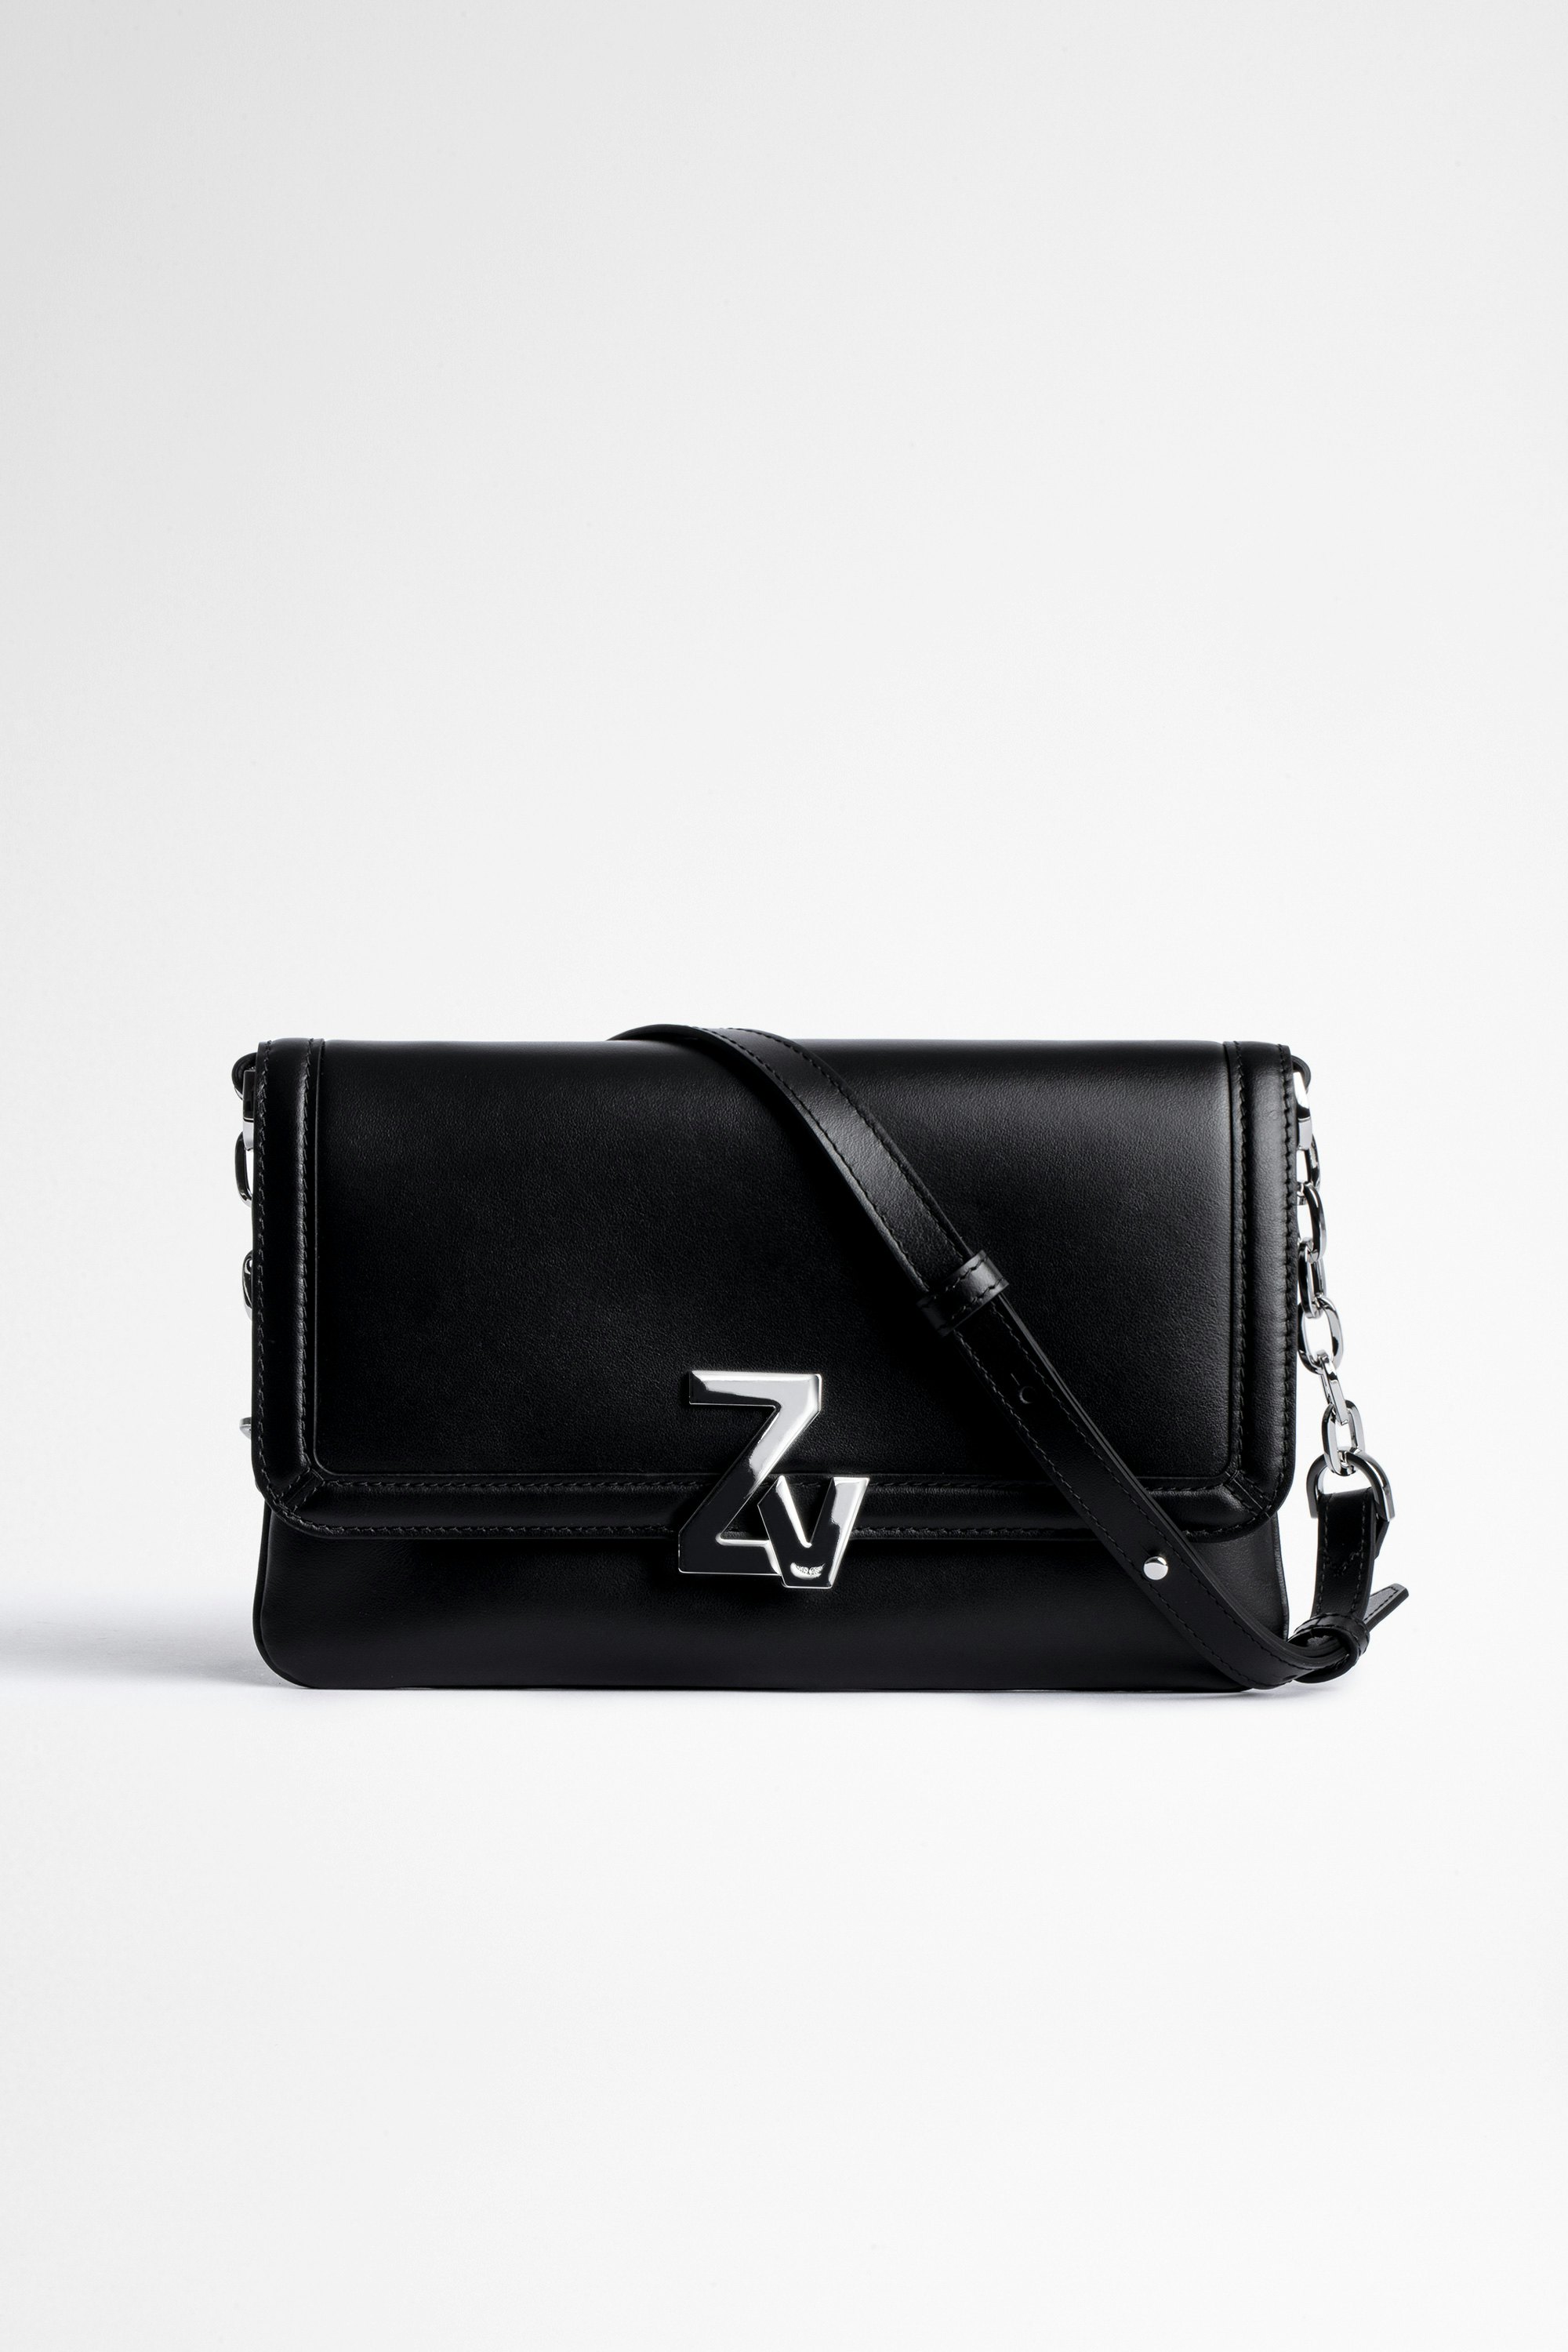 ZV Initiale La Clutch Bag Women's smooth black leather and silver ZV clutch